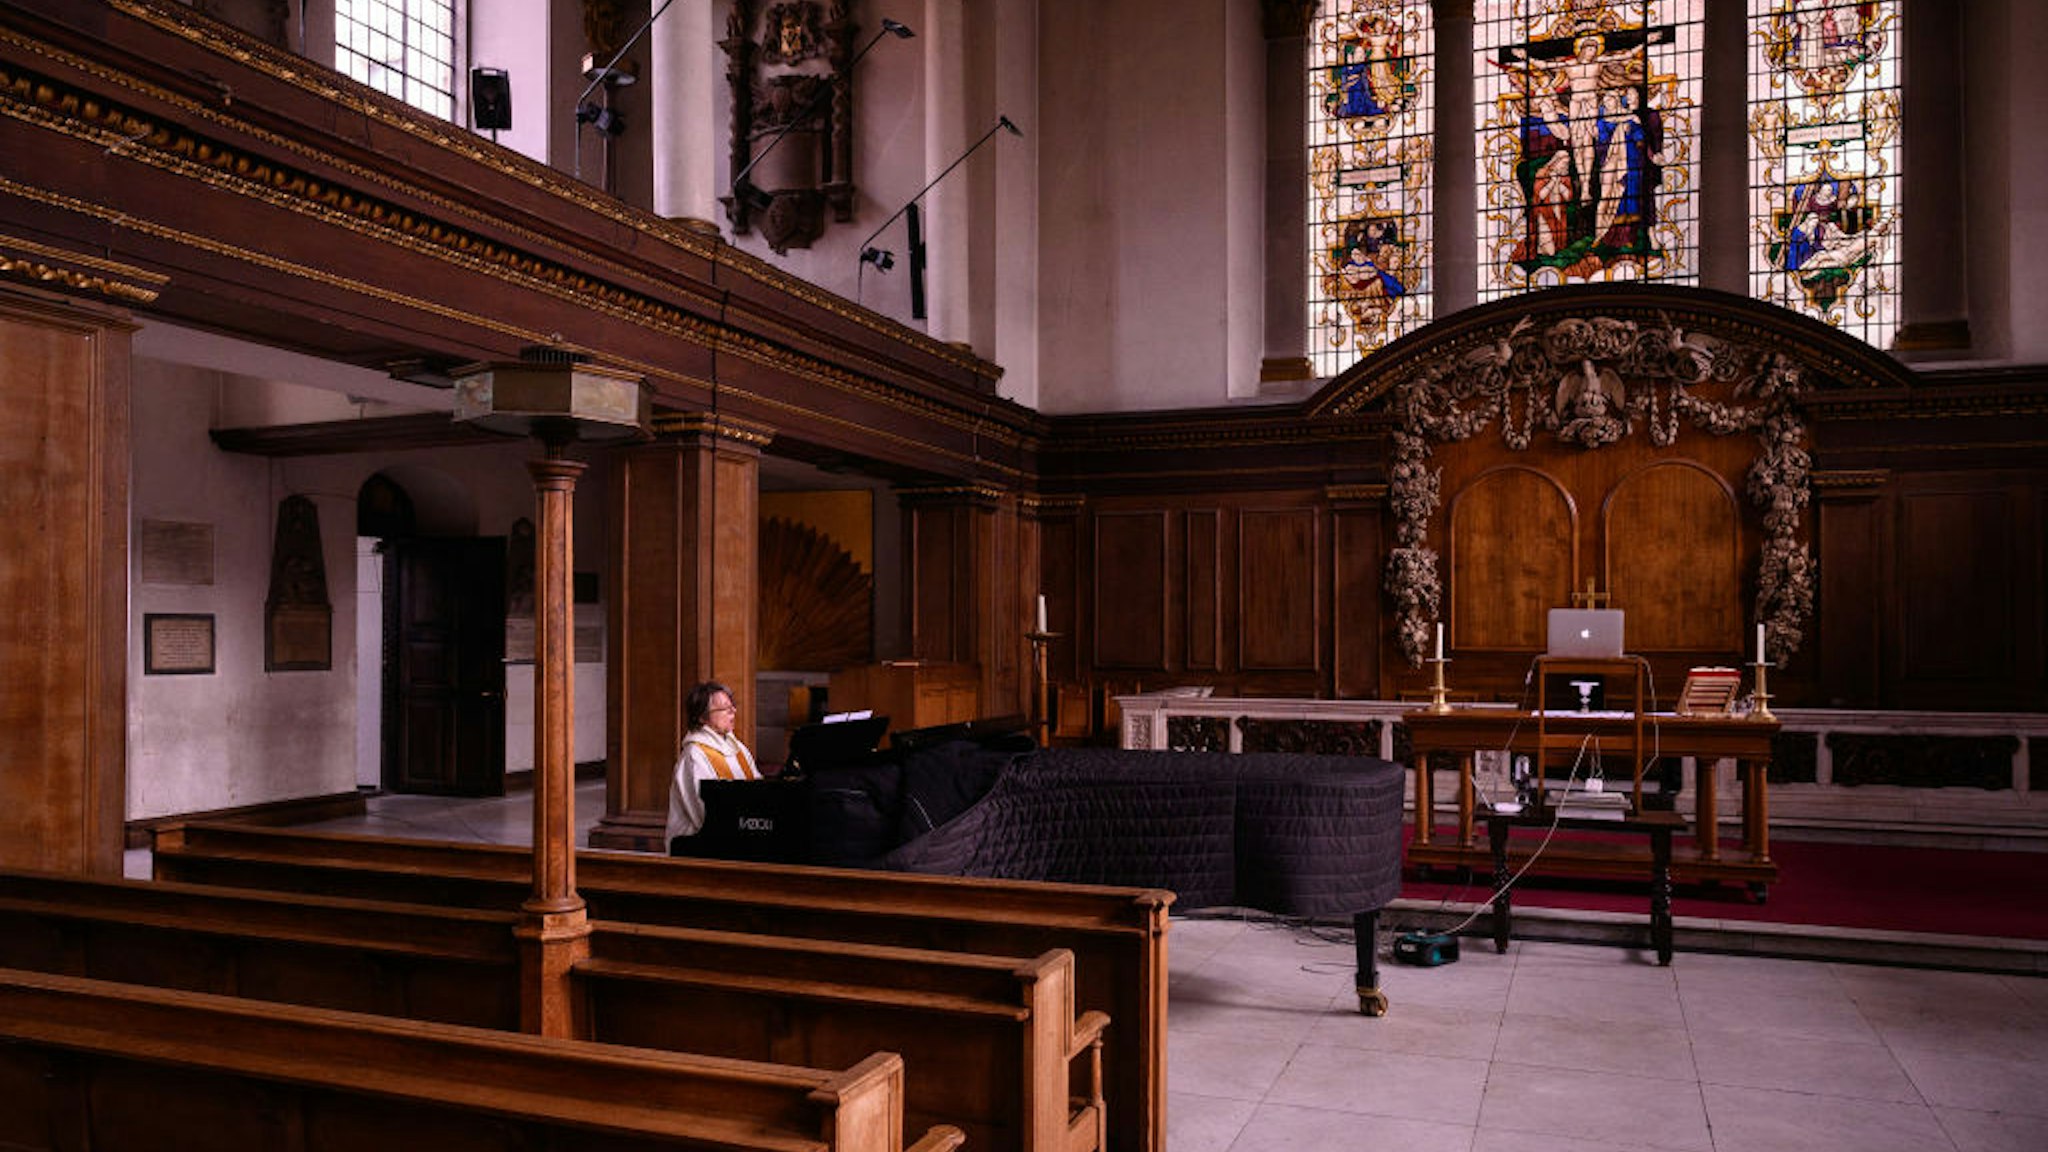 The reverend Lucy Winkett, rector of St James's Piccadilly, plays piano as she sings a hymn during the service on Rogation Sunday via webcam to the church's congregation on May 17, 2020 in London, England.